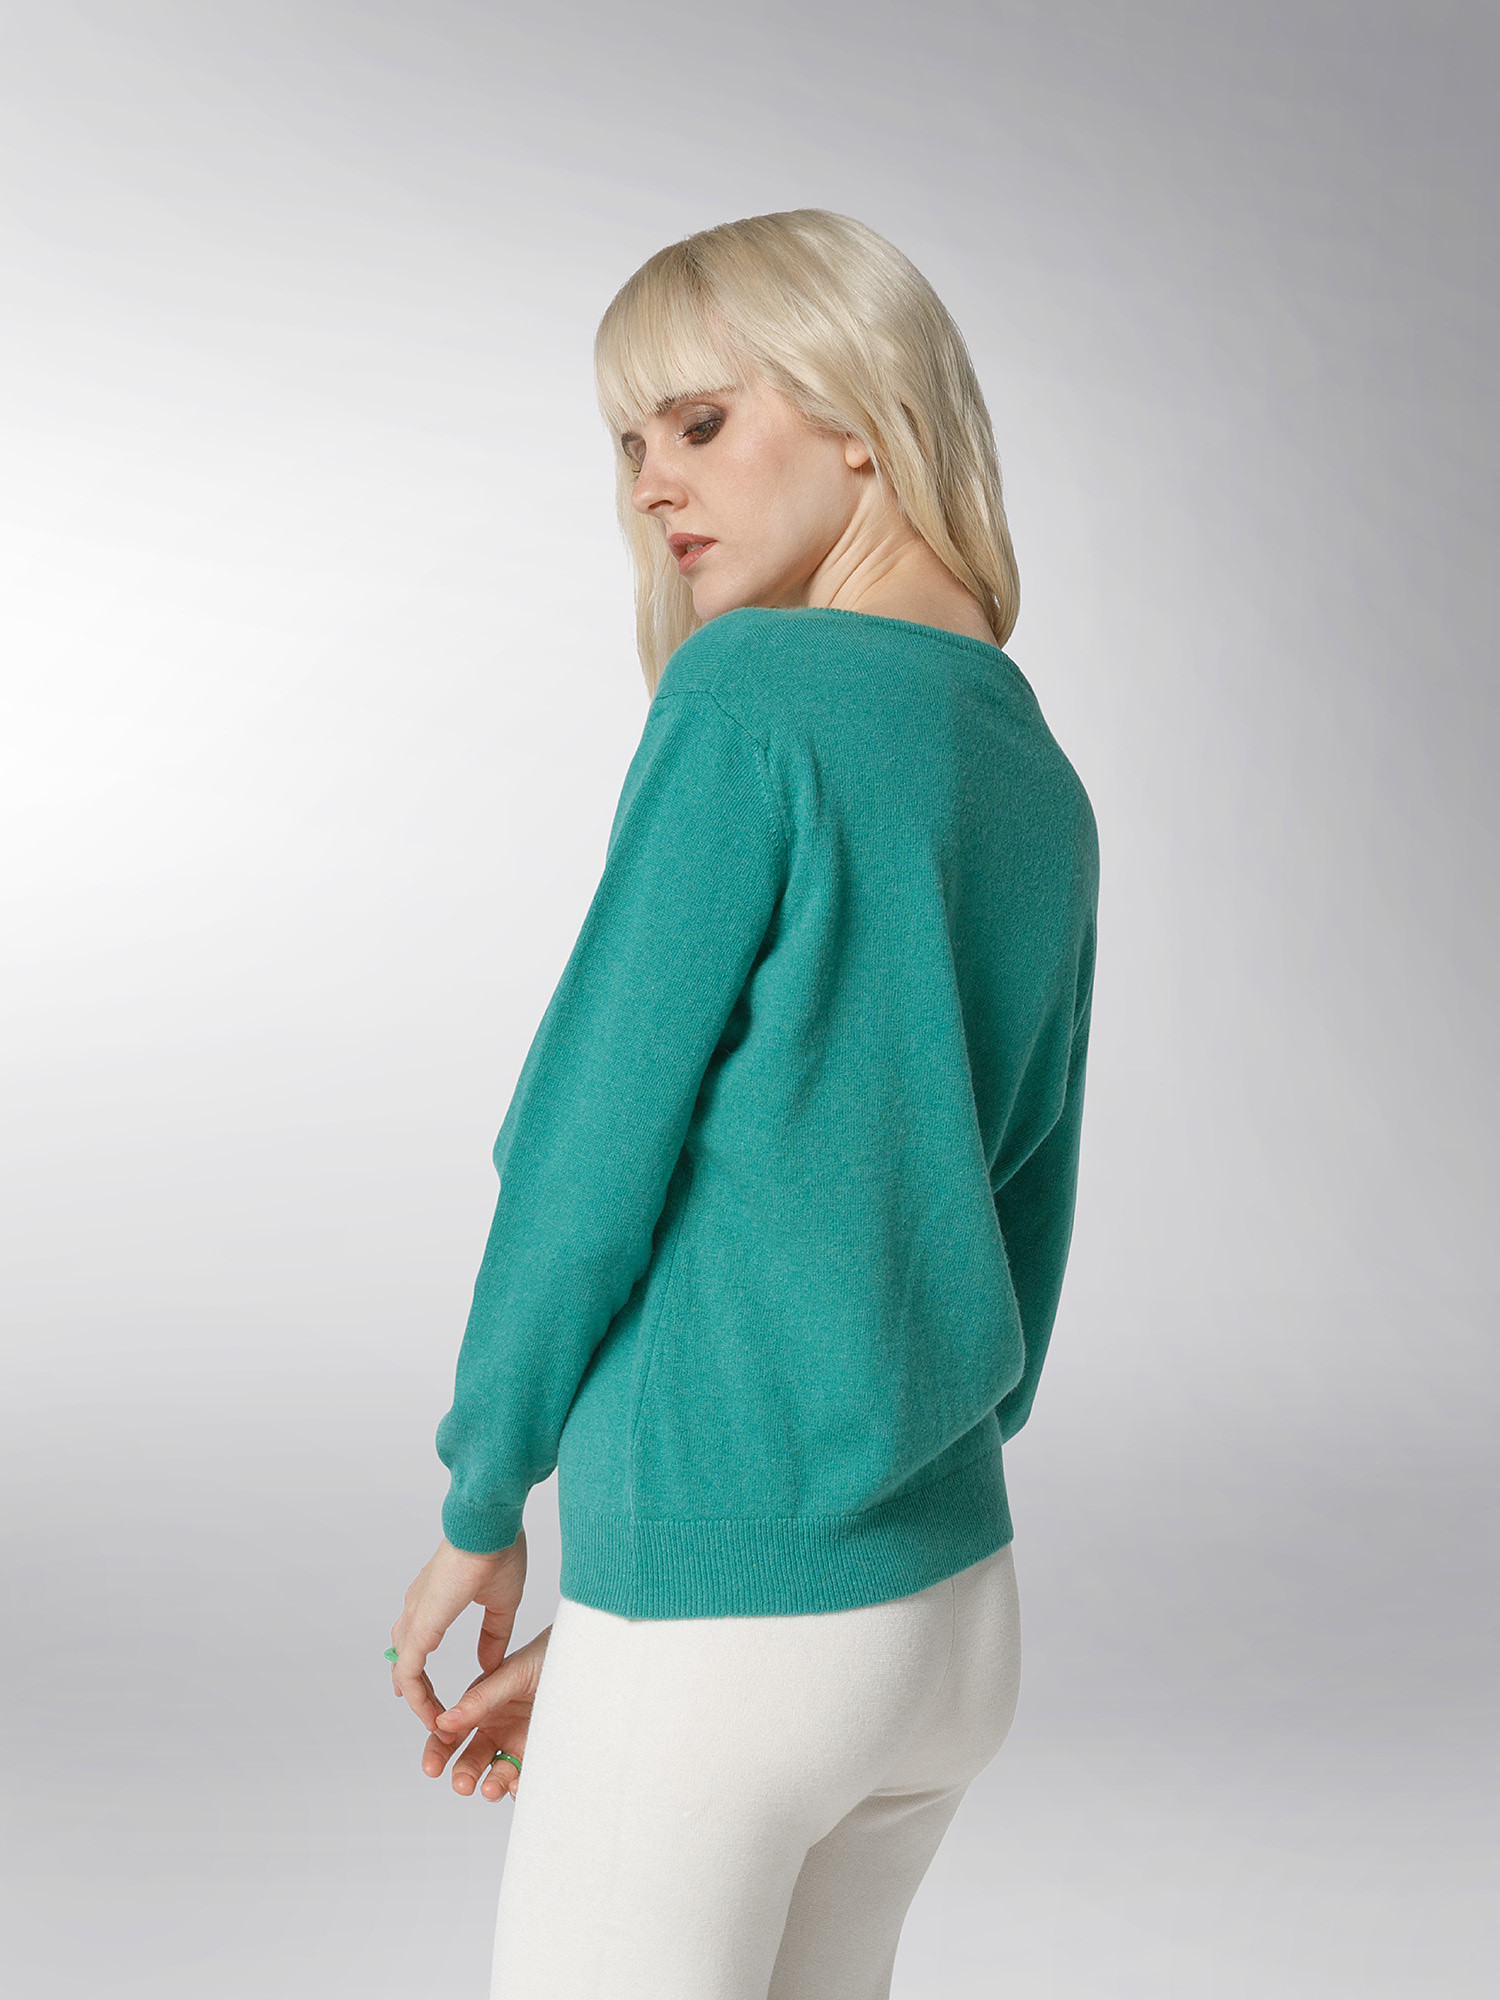 K Collection - Cardigan, Emerald, large image number 4